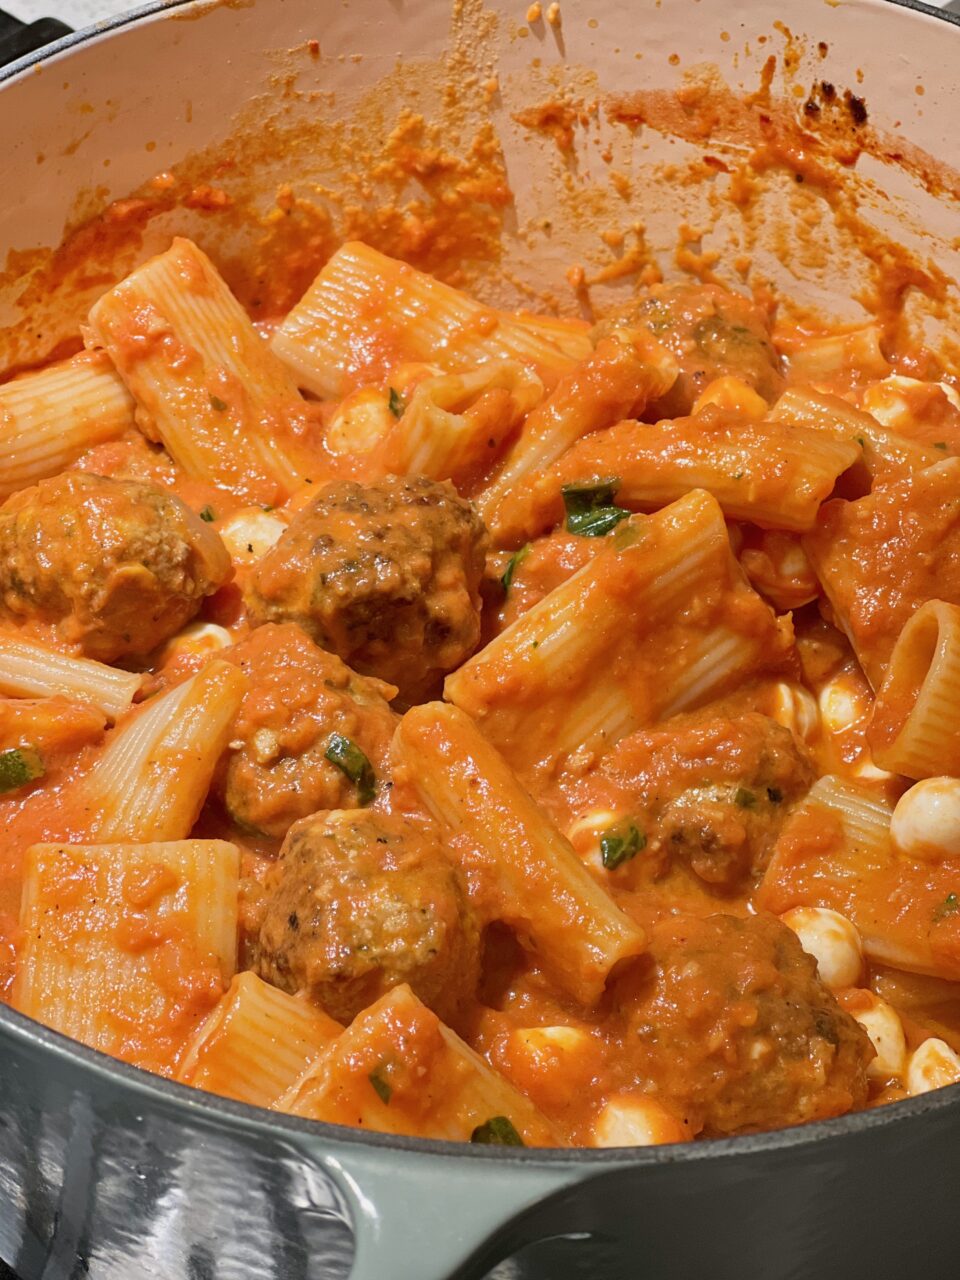 A large pot of tomato sauce cooking with meatballs